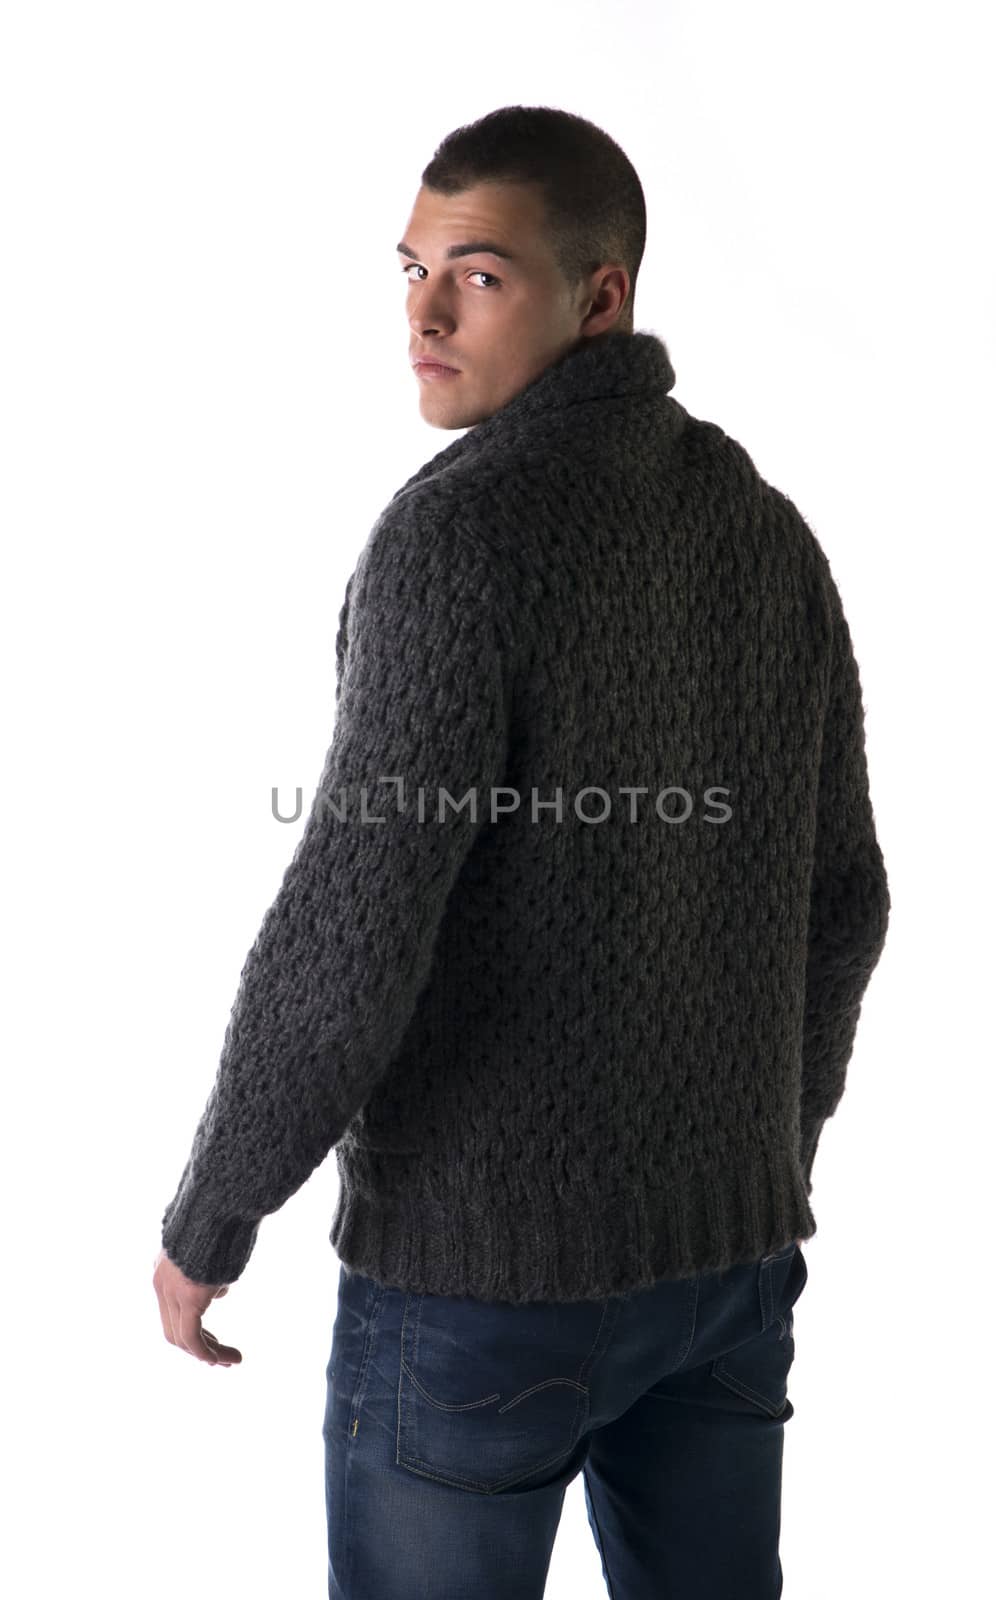 Back view of young man with wool sweater and jeans by artofphoto